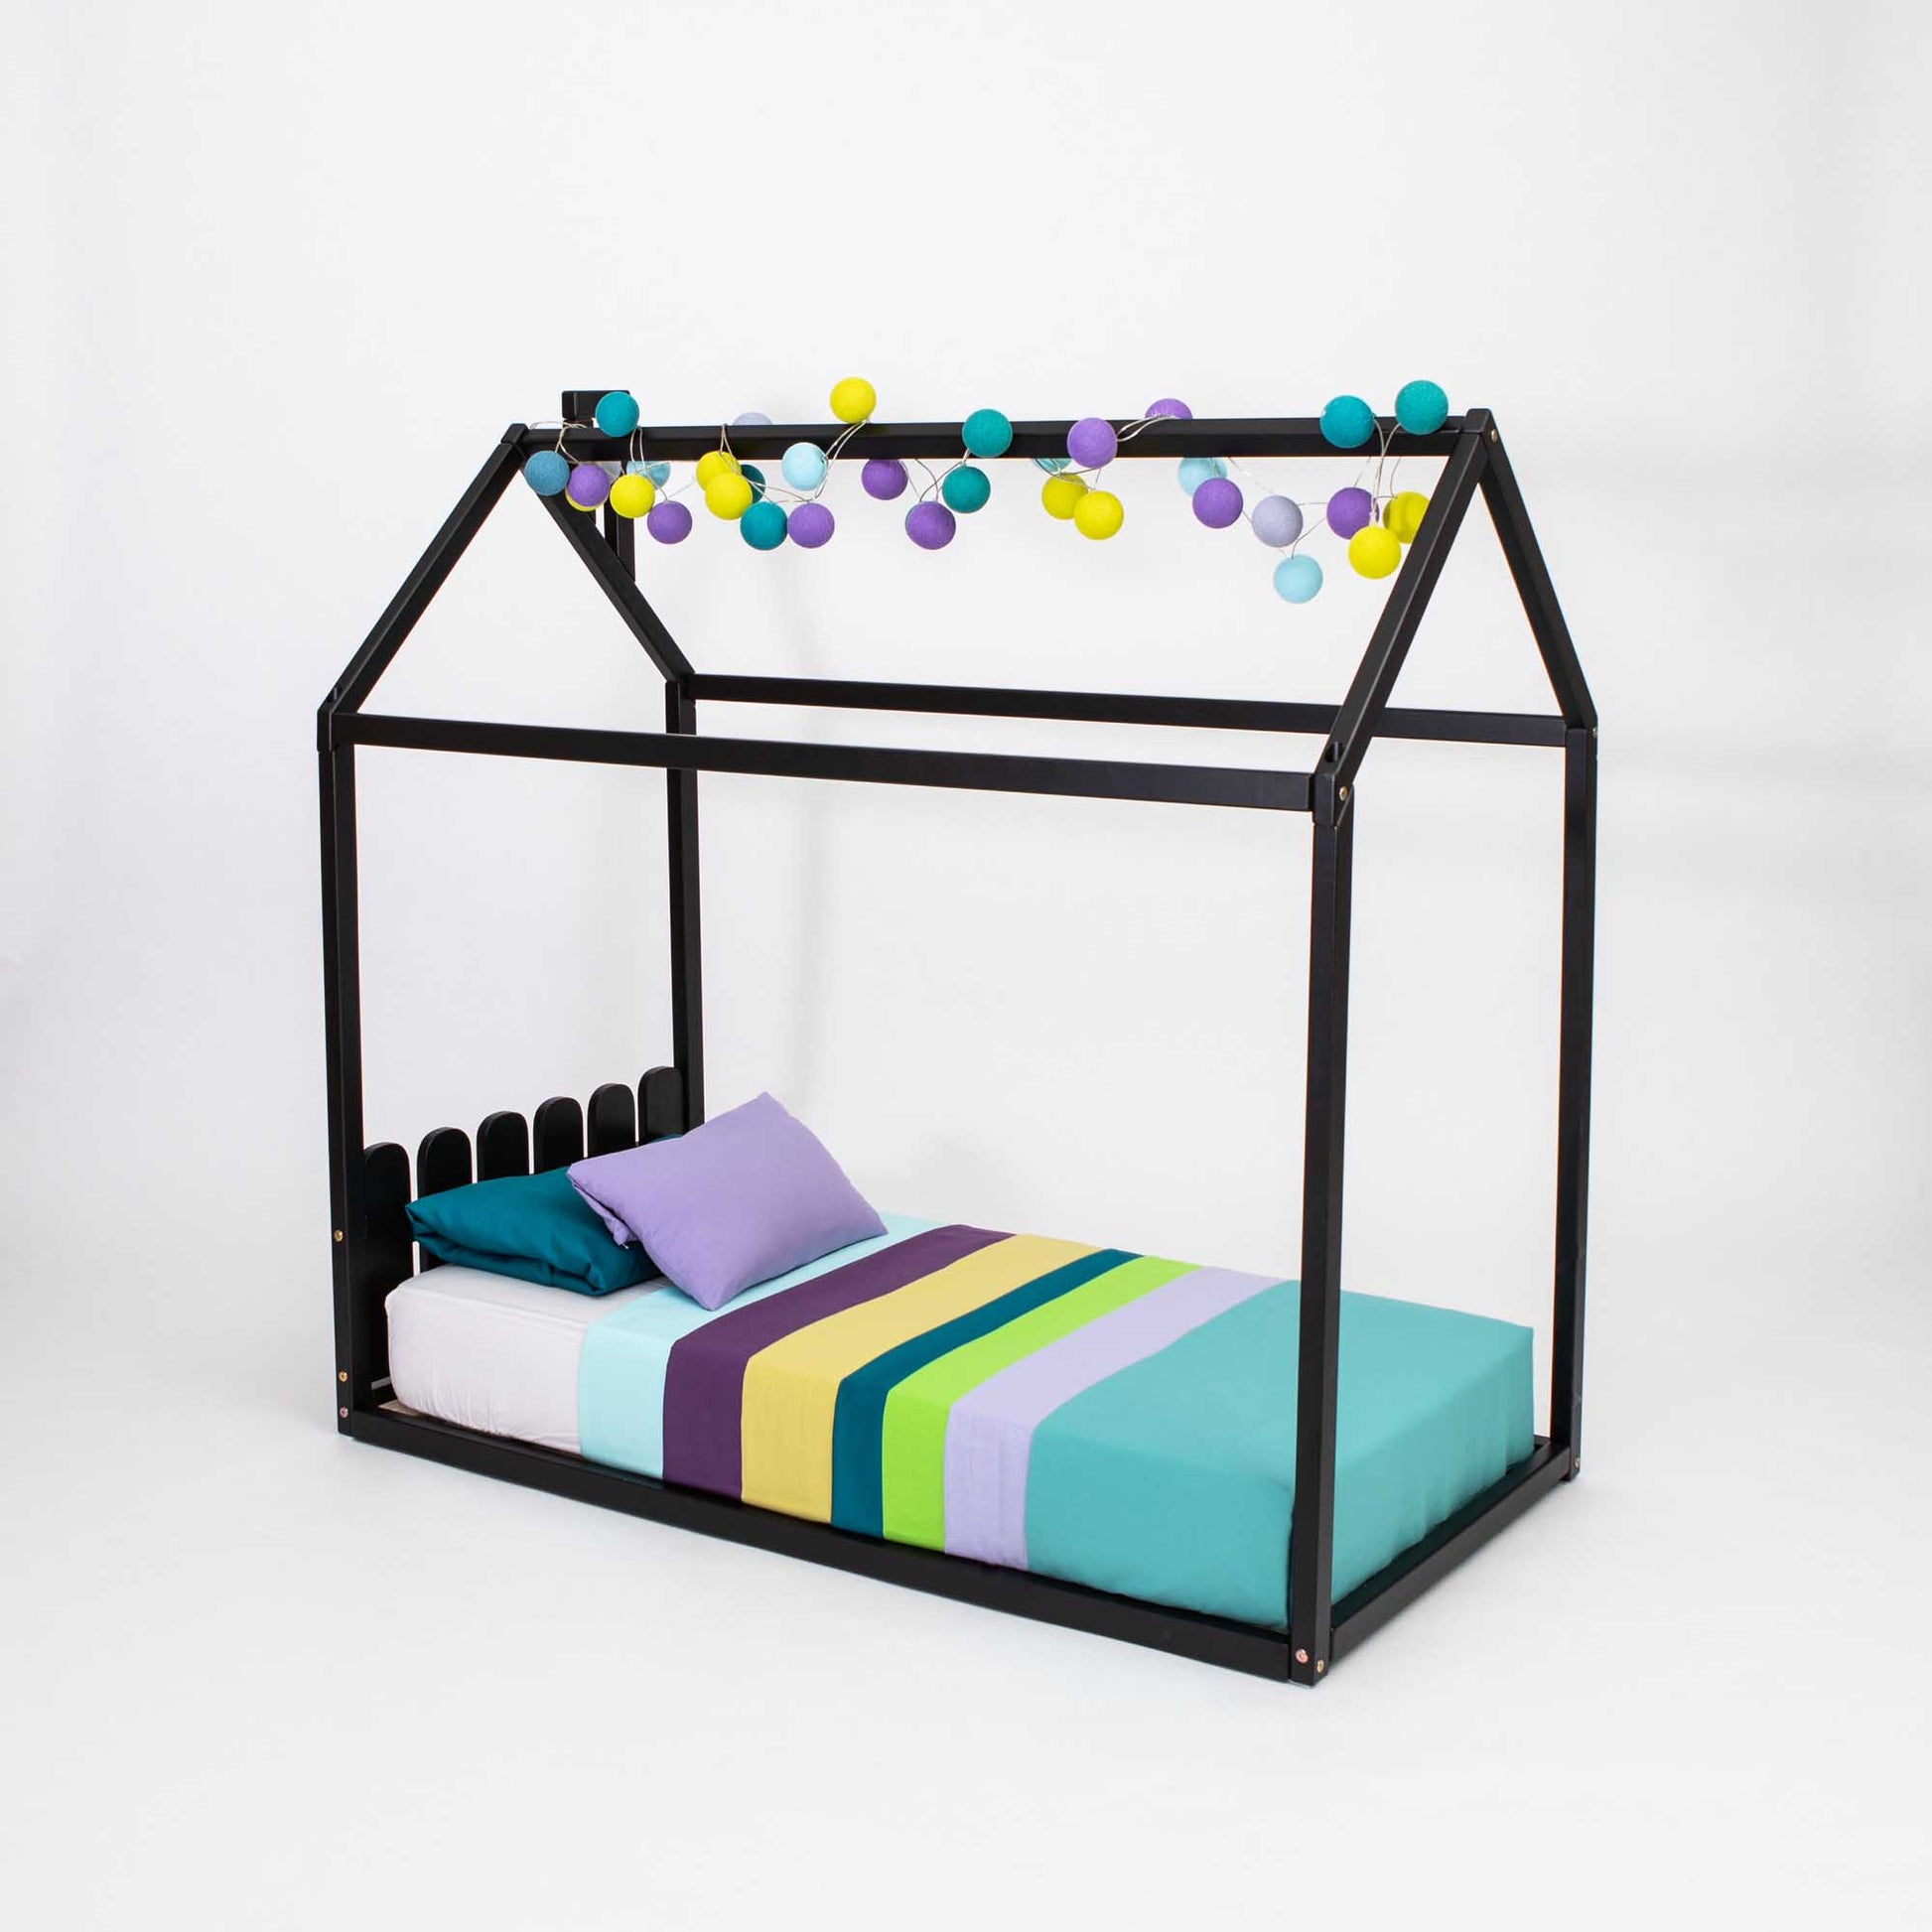 A Kids' house-frame bed with a picket fence headboard with colorful pom poms hanging from it.